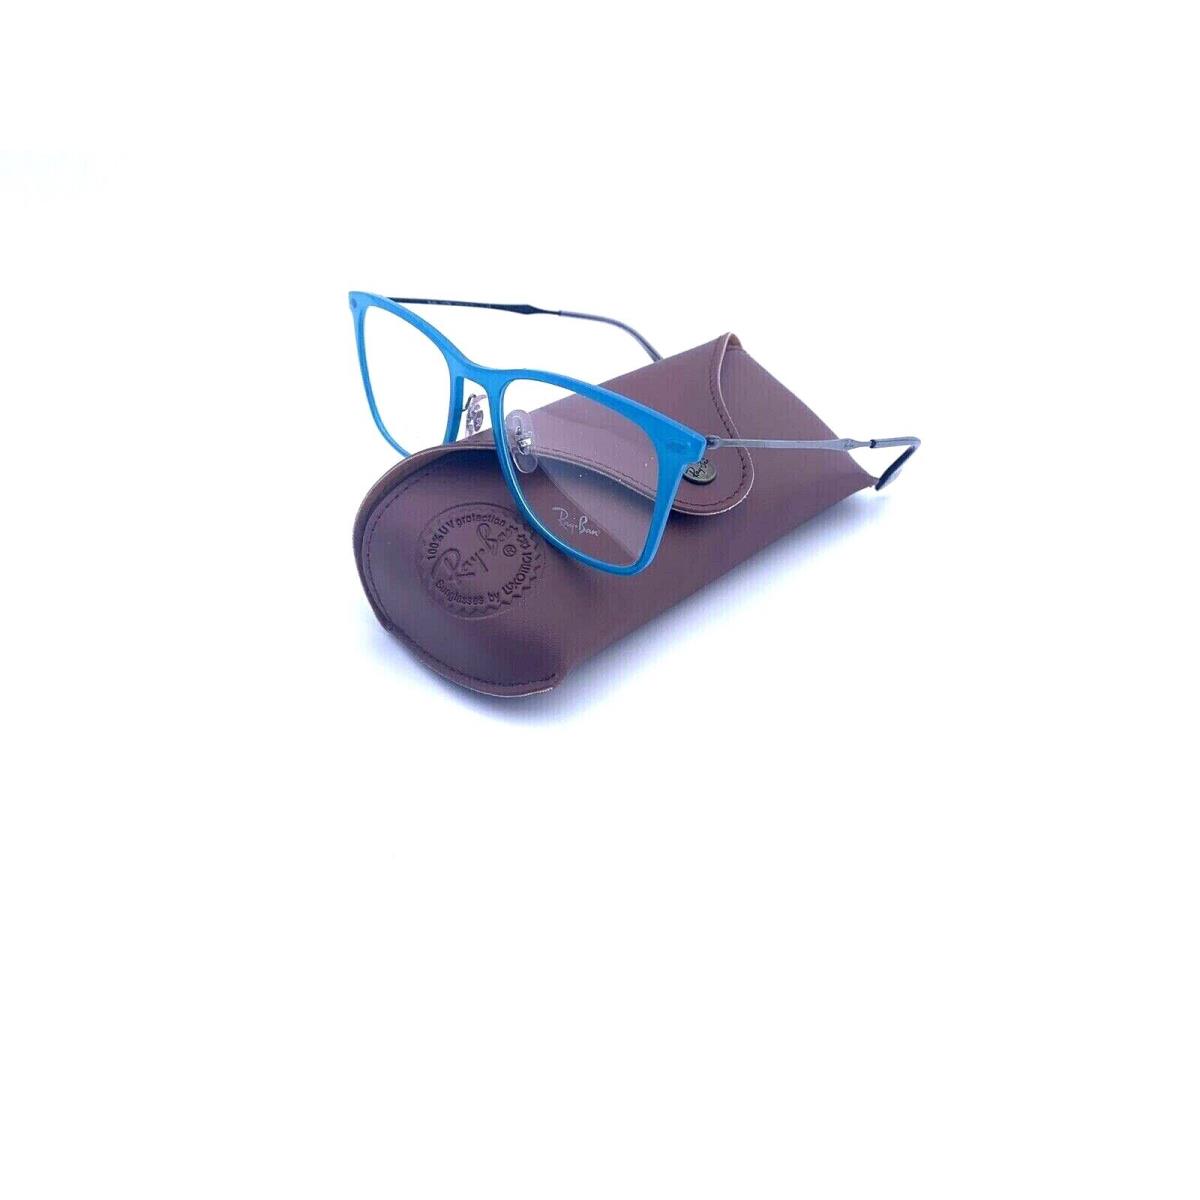 Ray-ban Frames Lightray Turquoise Acetate Unisex RB7086 5640 51 18 140